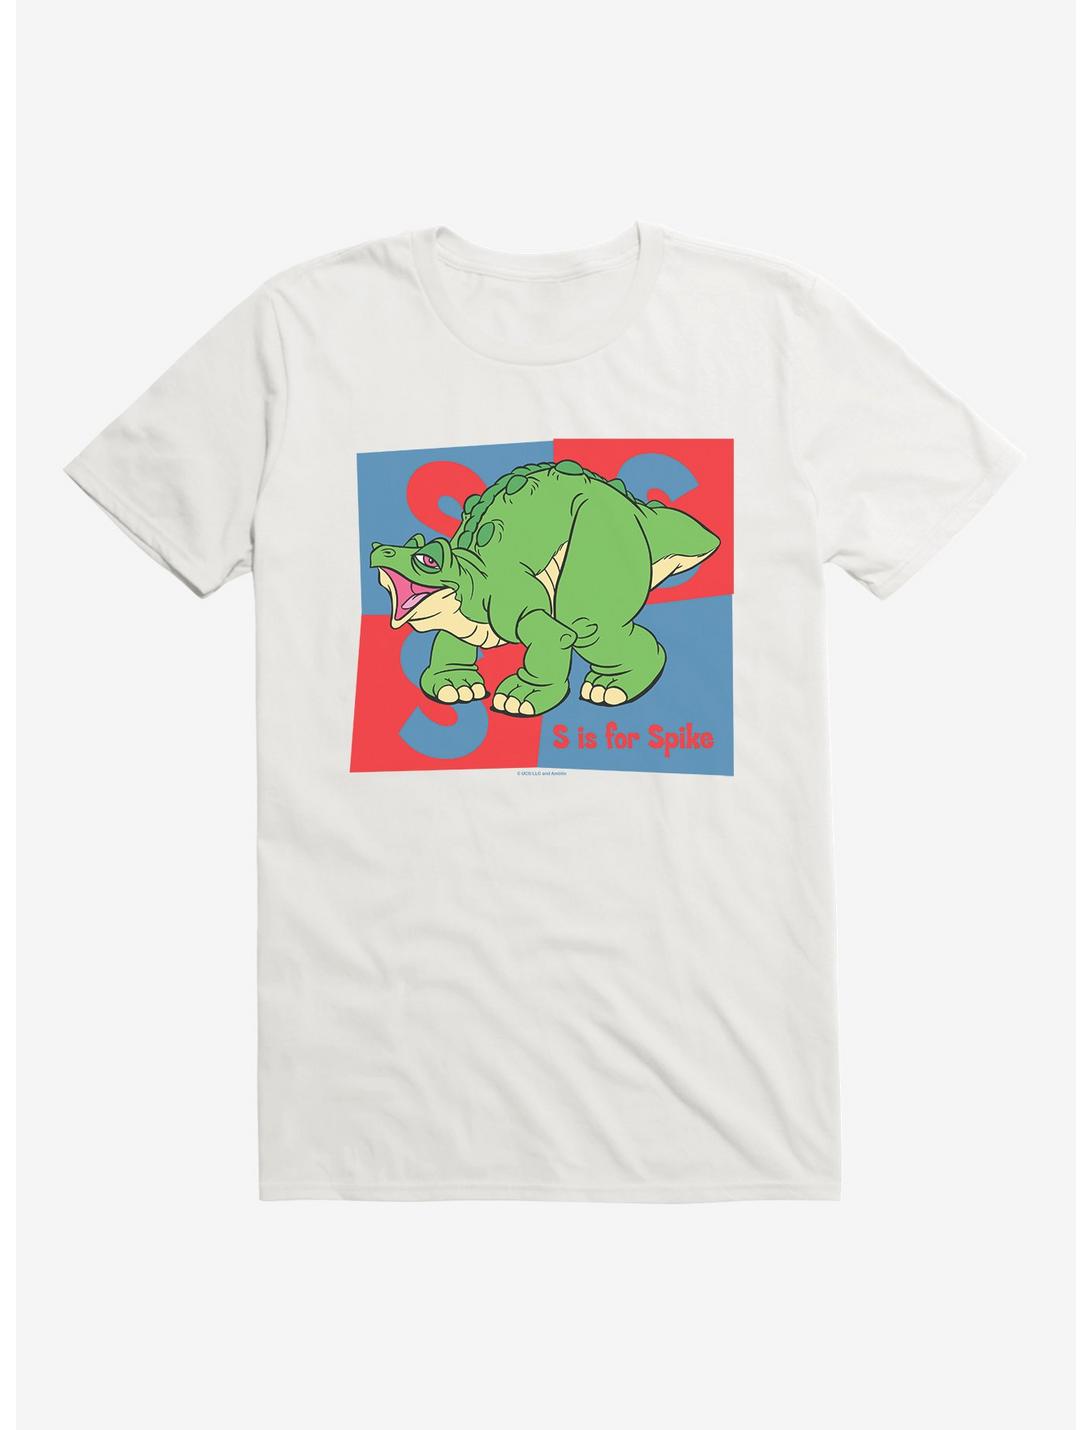 The Land Before Time S Is For Spike T-Shirt, WHITE, hi-res